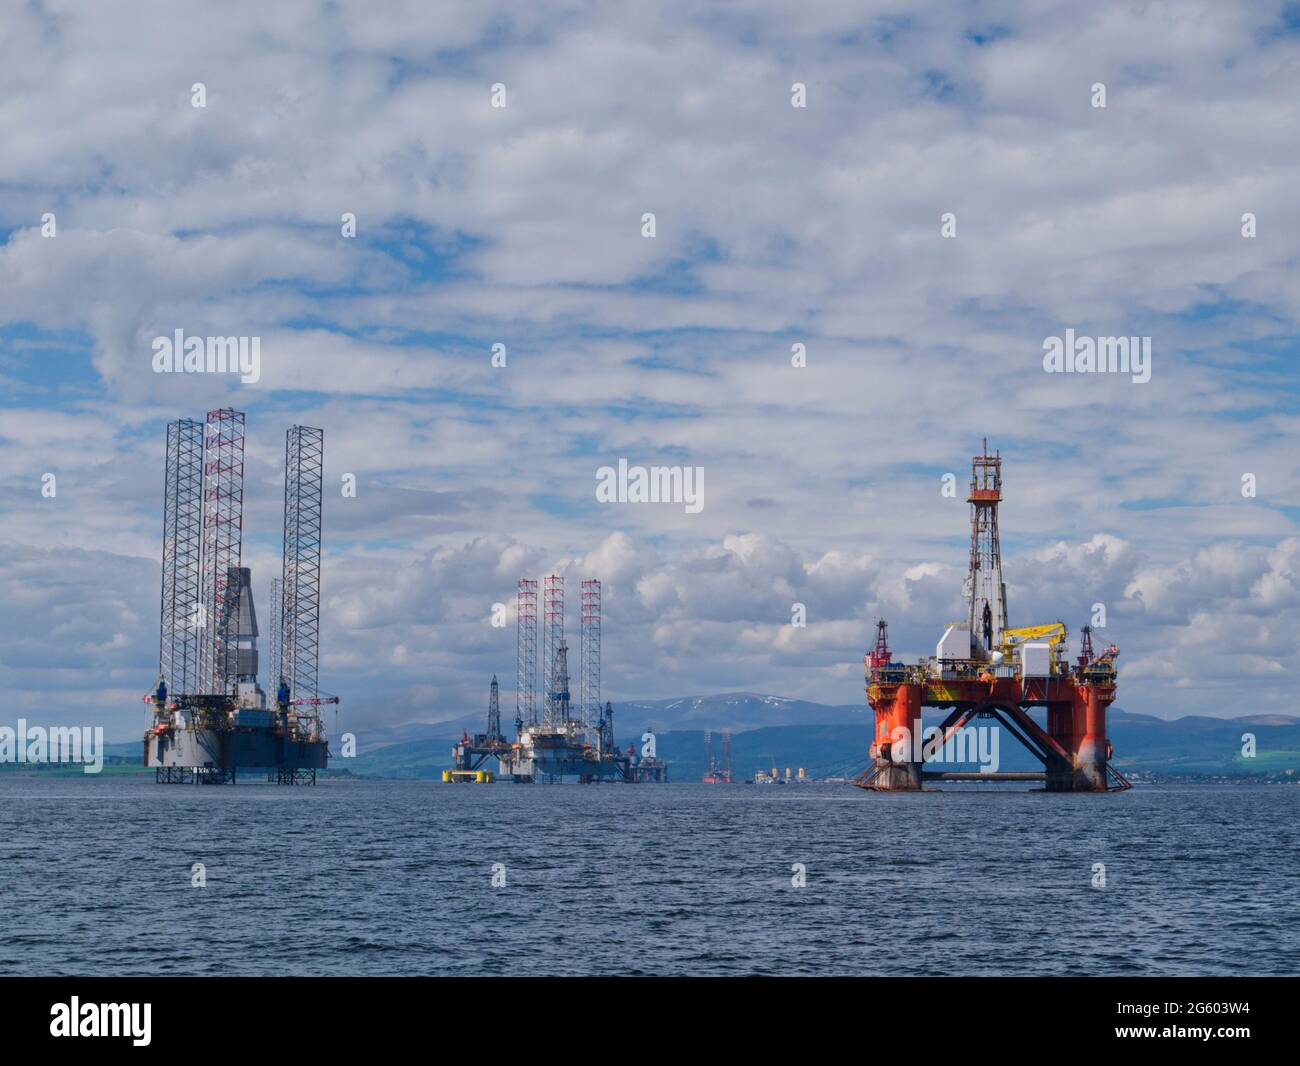 Oil platforms in Cromarty Firth, Scotland Stock Photo